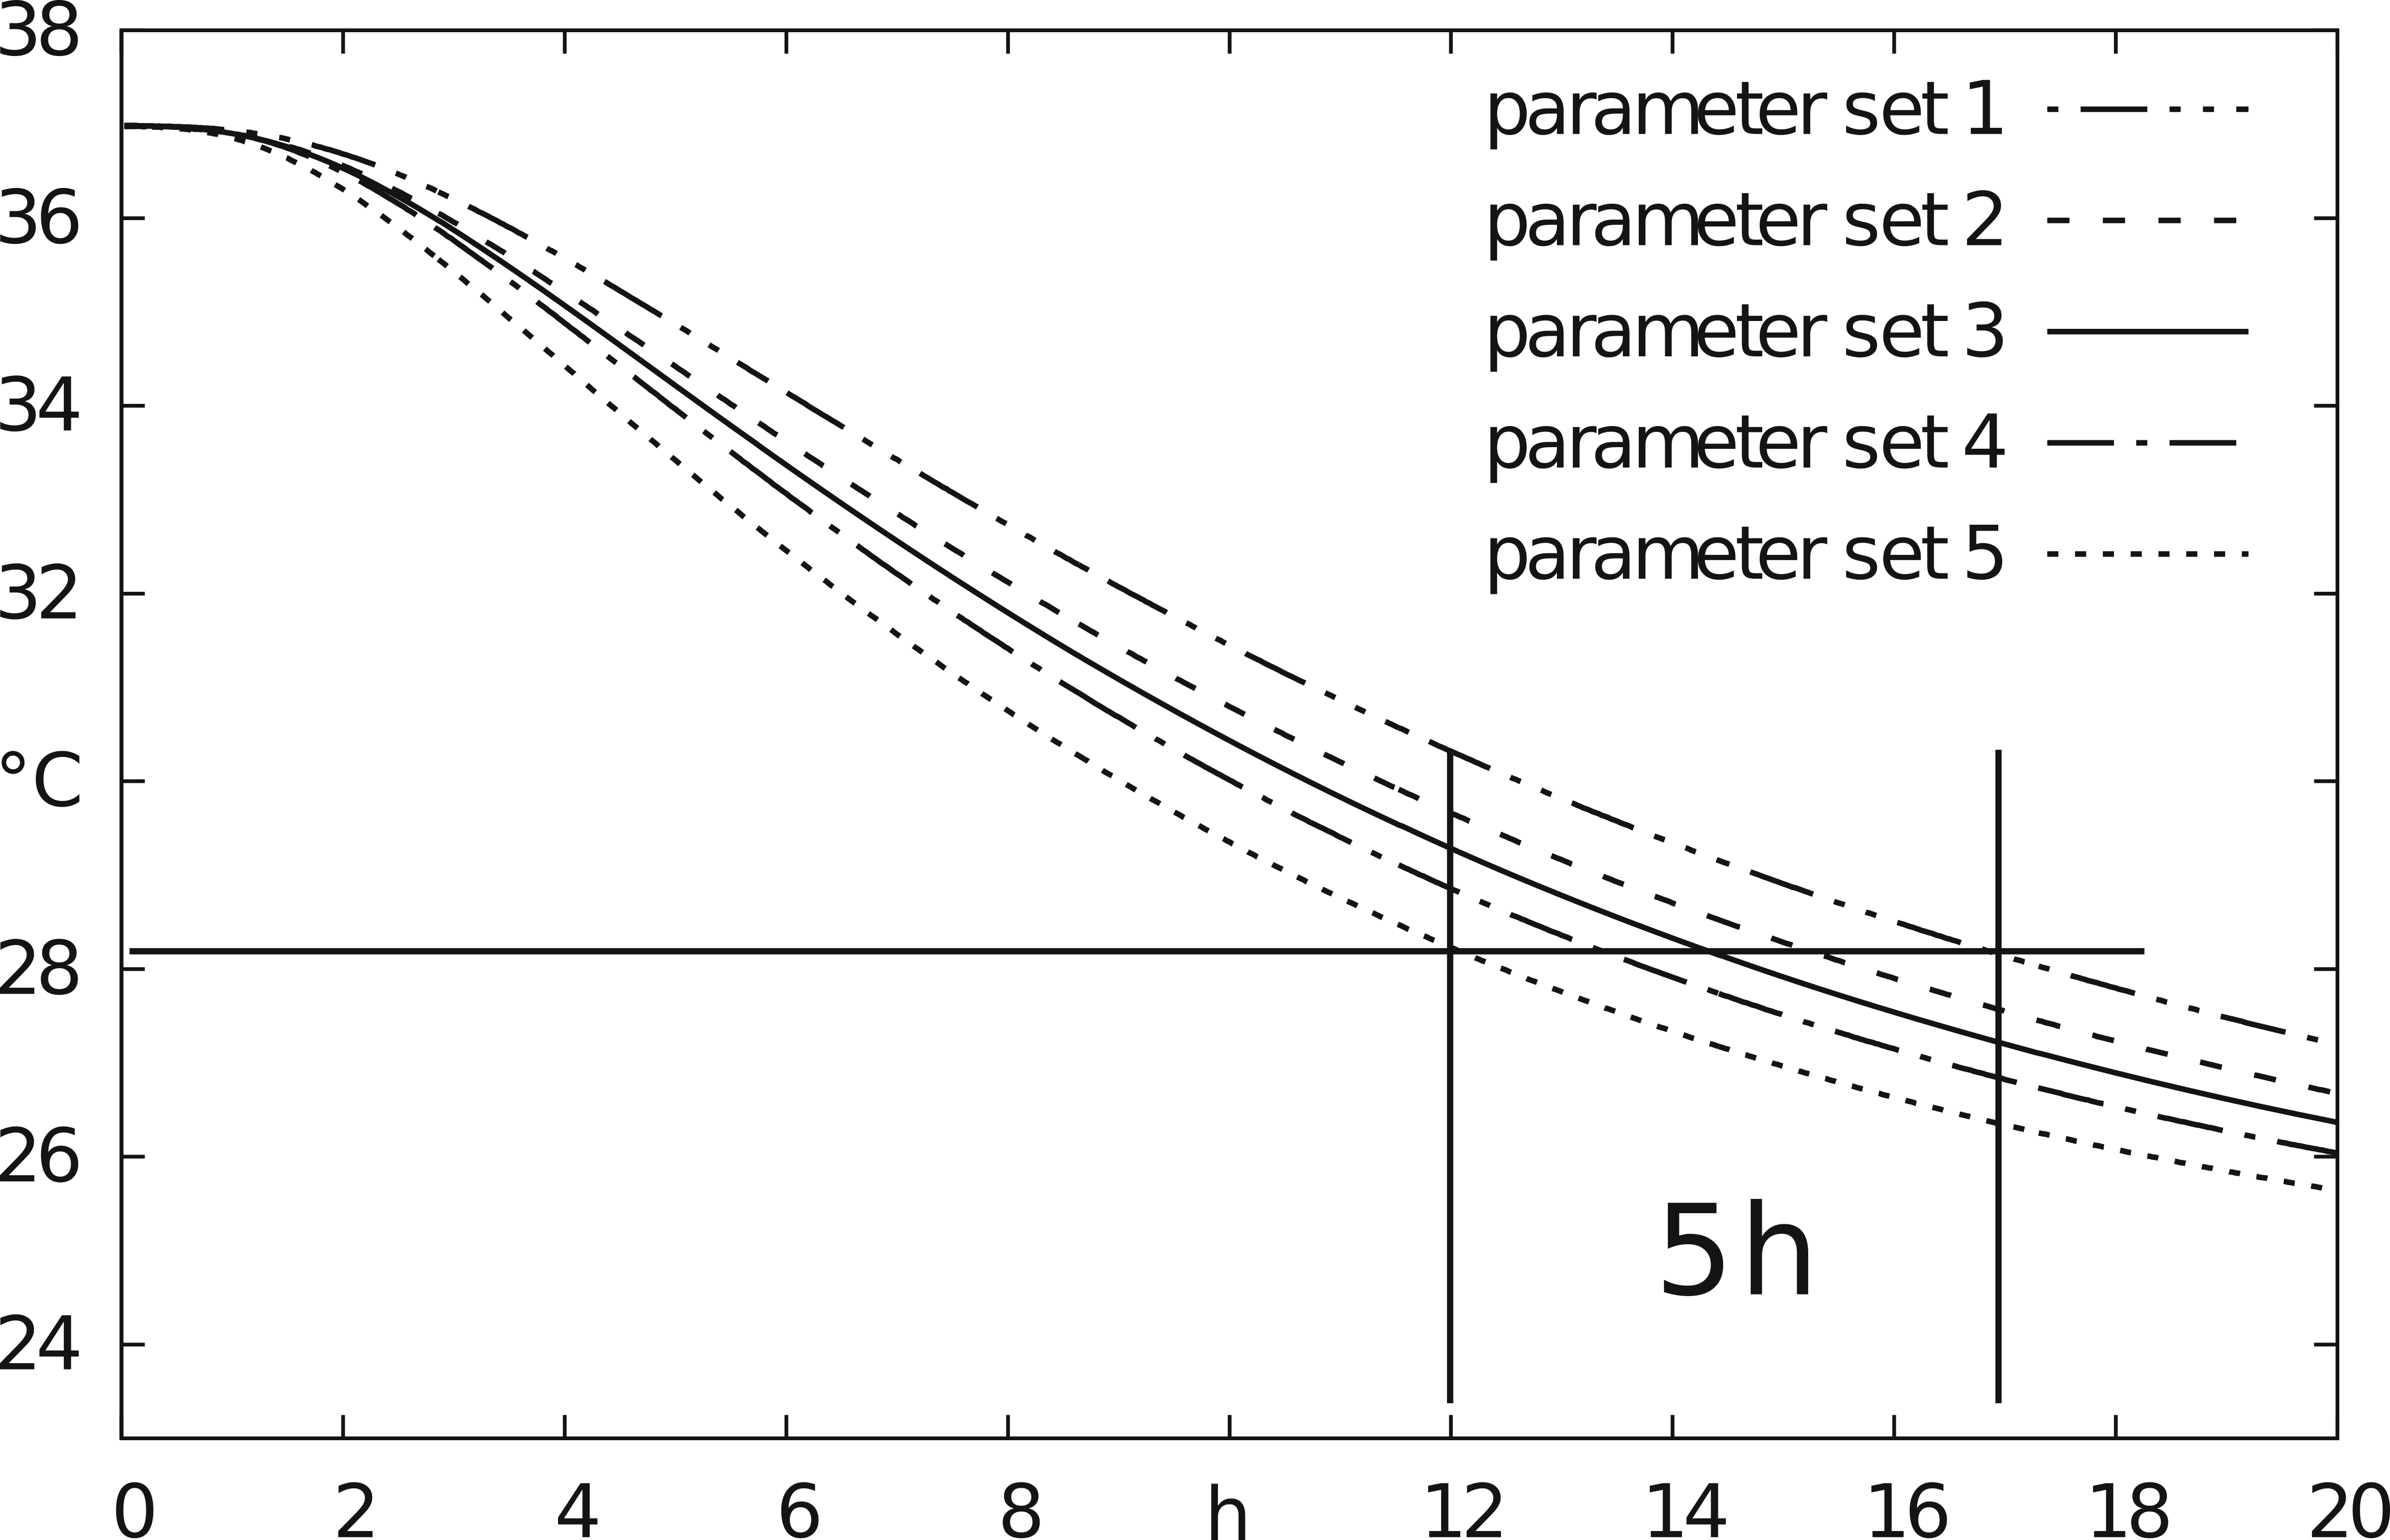 Cooling curves for different parameter sets from FE simulation, leading to significant deviation in time of death